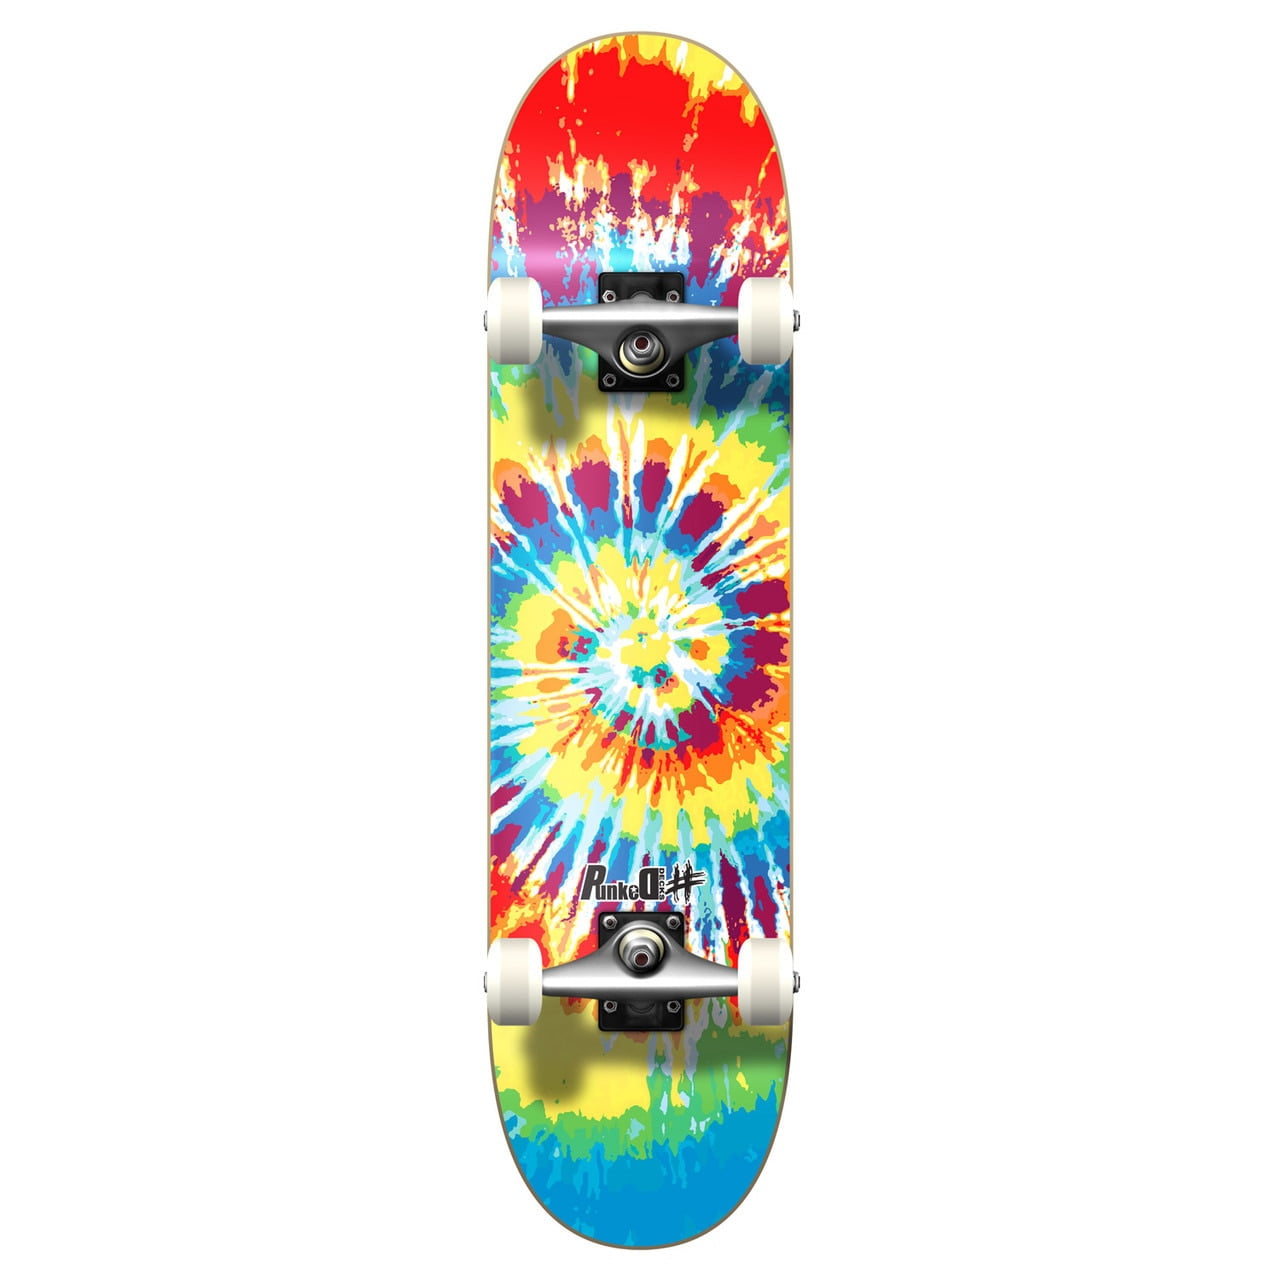 Yocaher Graphic Complete 31 In. x 7.75 In. Skateboard - Tiedye Original